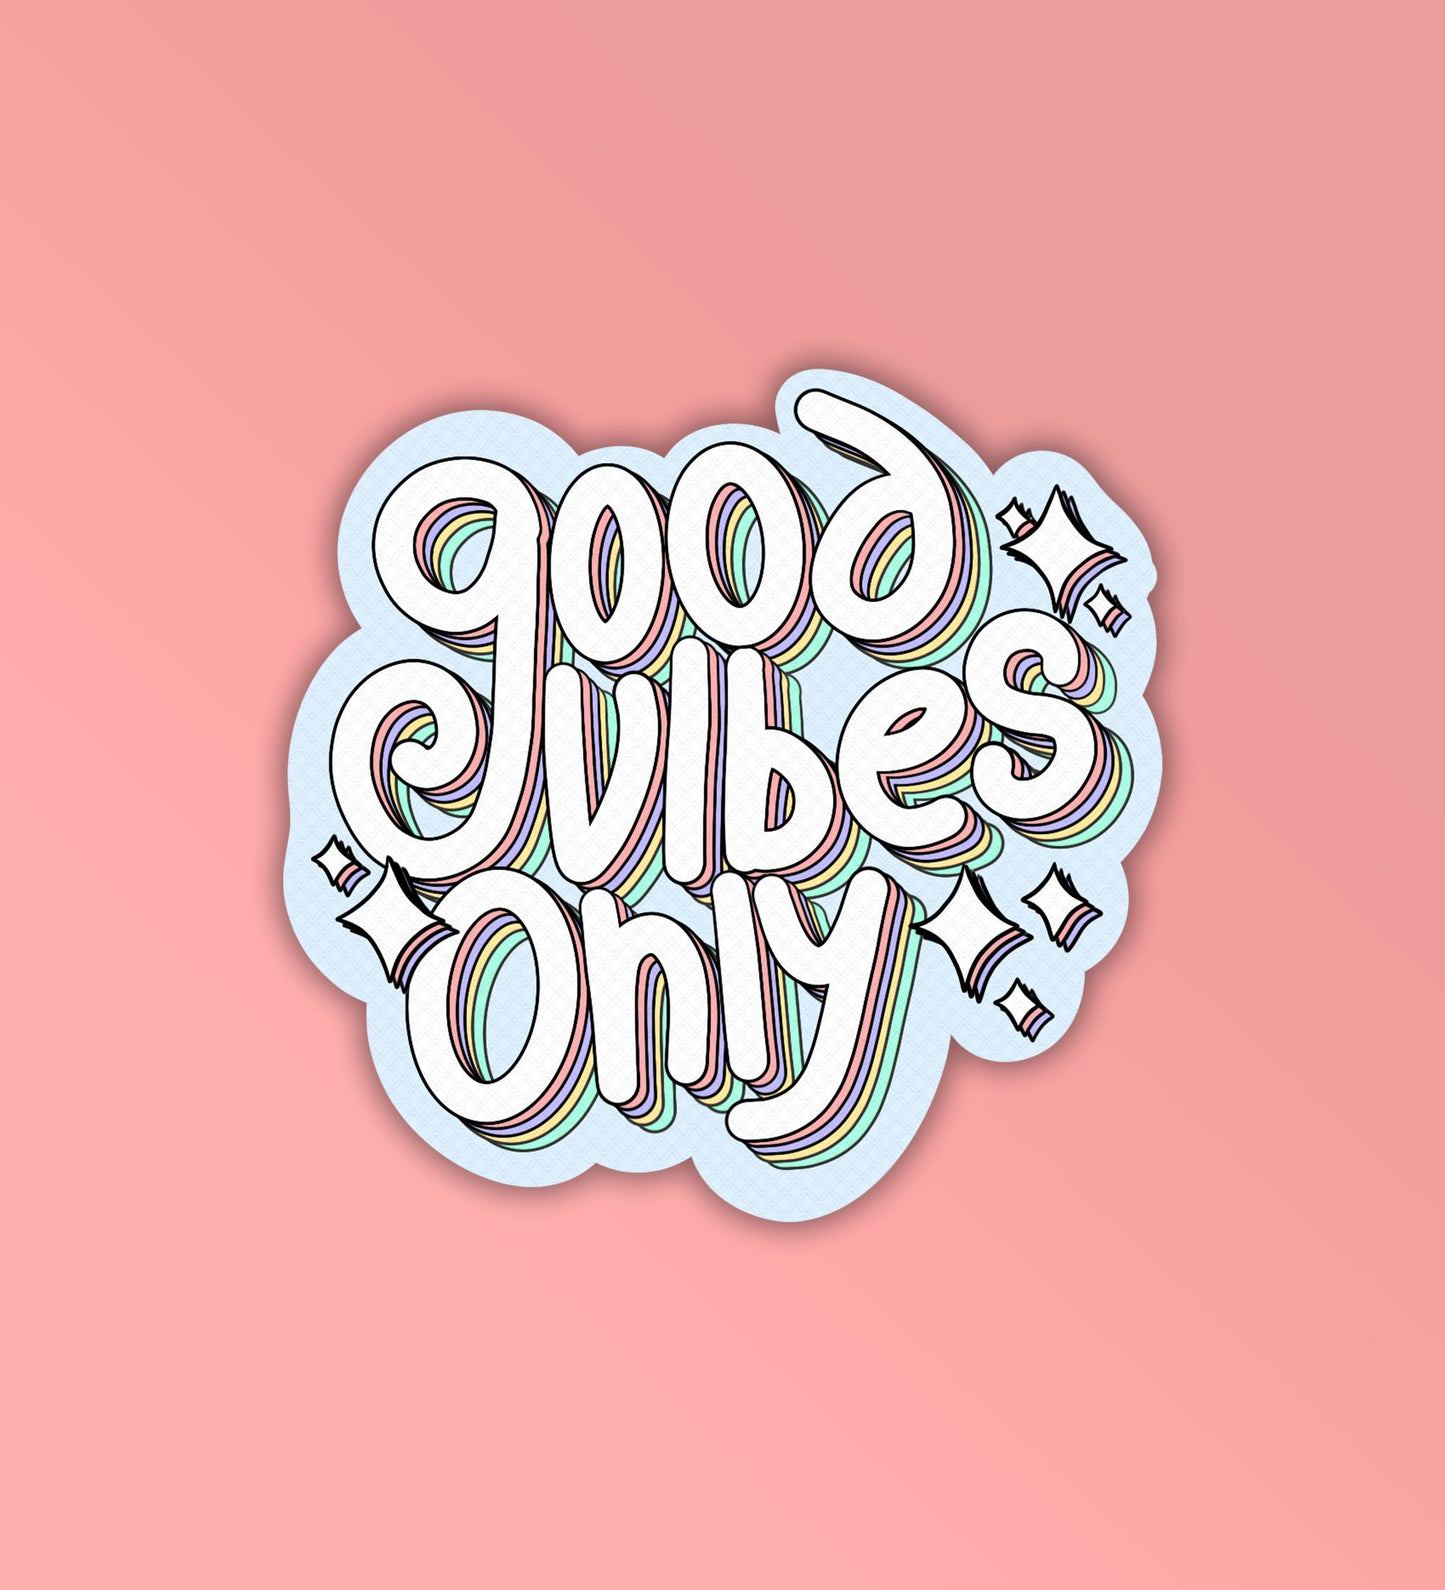 Good Vibes Only - Laptop & Mobile Stickers